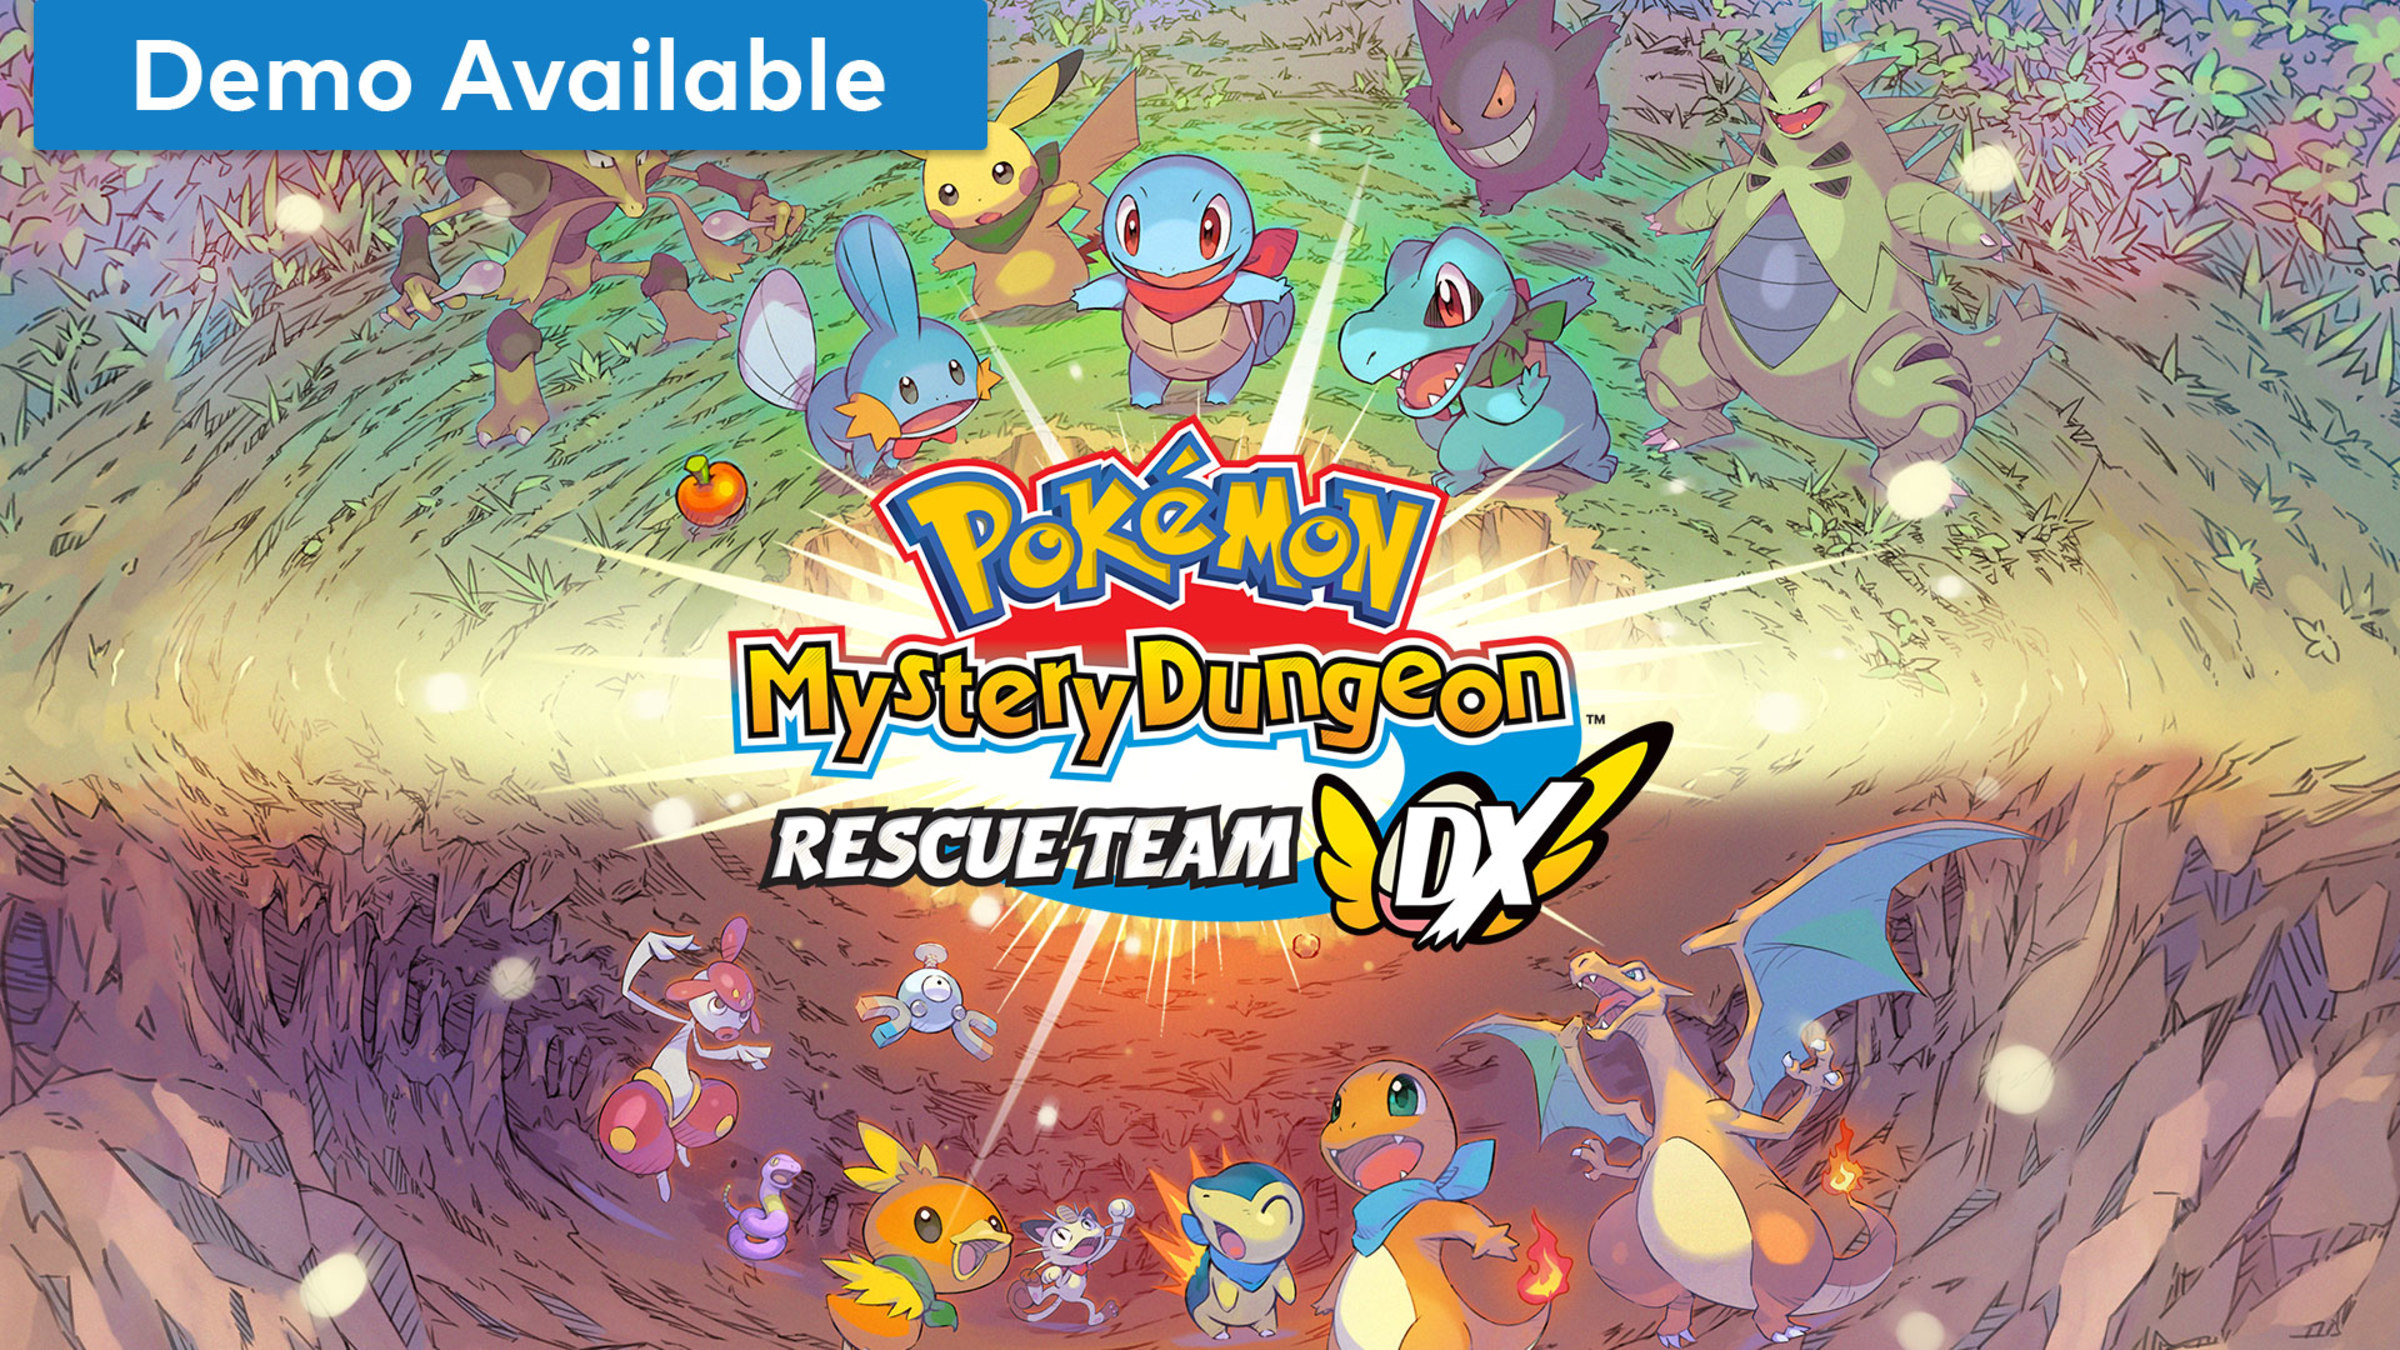 Switch - Team Official Dungeon™: Site DX Rescue Nintendo Mystery for Nintendo Pokémon